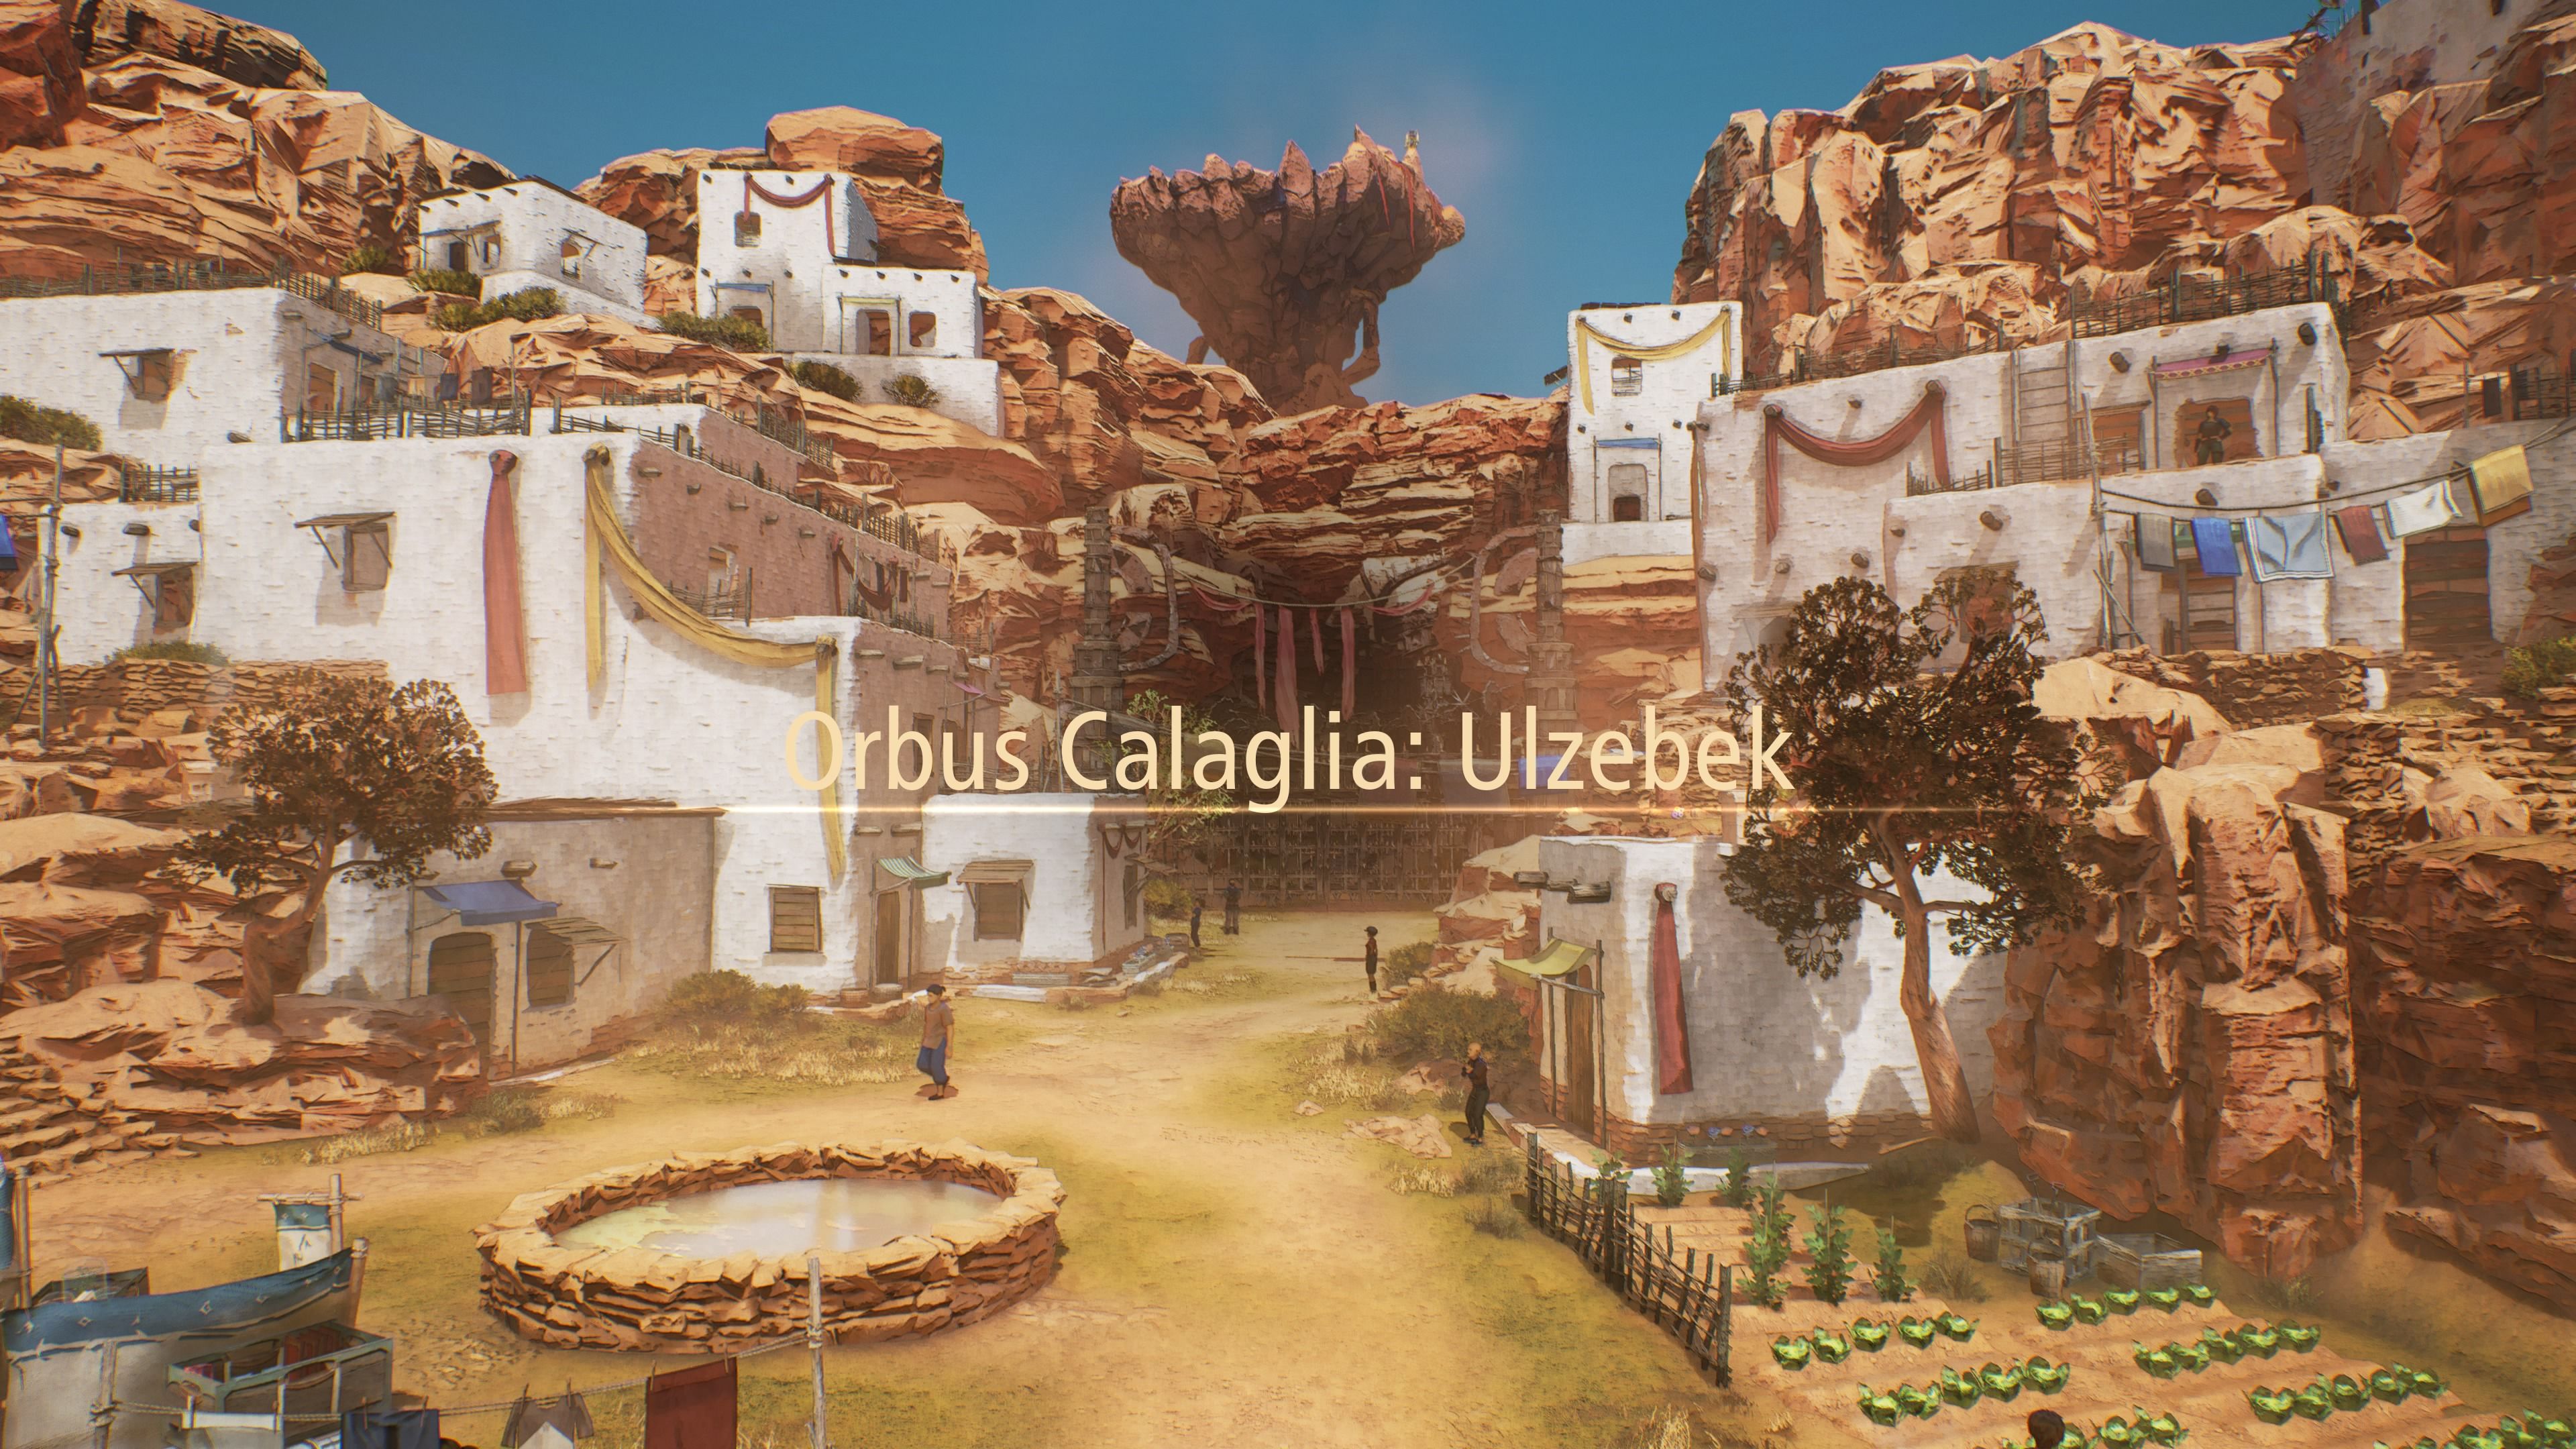 The town of Ulzebek in the Orbus Calaglia region of Tales of Arise: Beyond the Dawn